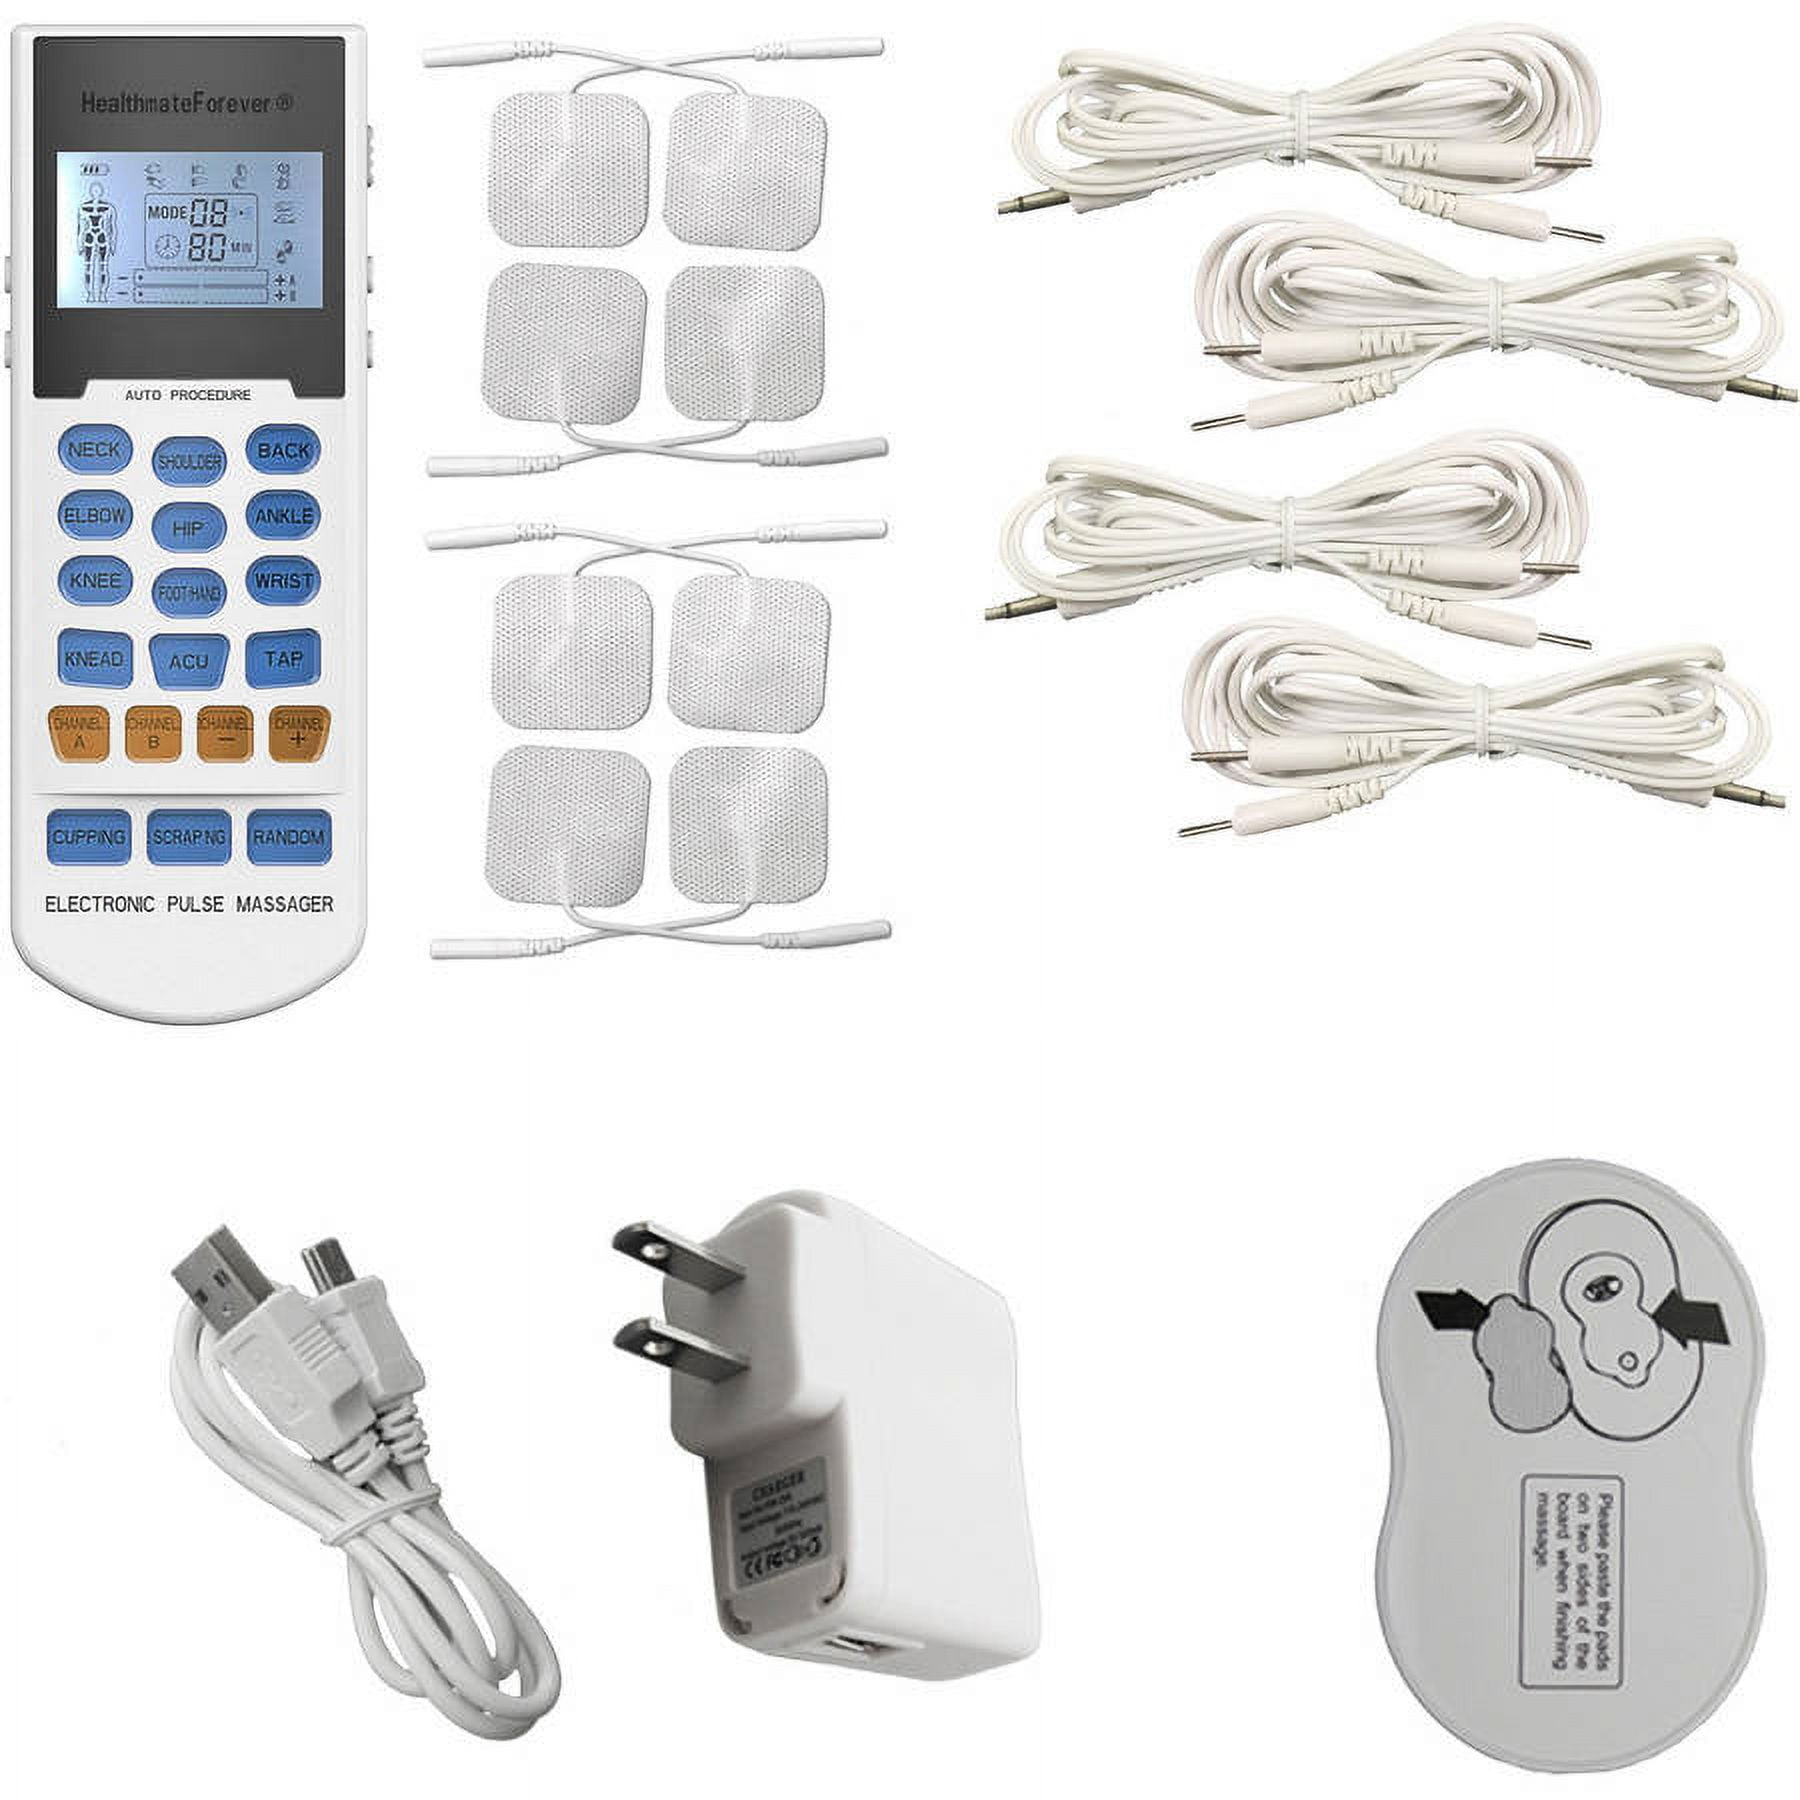 HealthmateForever YK15AB TENS unit EMS Muscle Stimulator 4 outputs 15 modes  Handheld Electrotherapy device  Electronic Pulse Massager for  Electrotherapy Pain Management Pain Relief Therapy: Chosen by Sufferers of  Tennis Elbow, Carpal